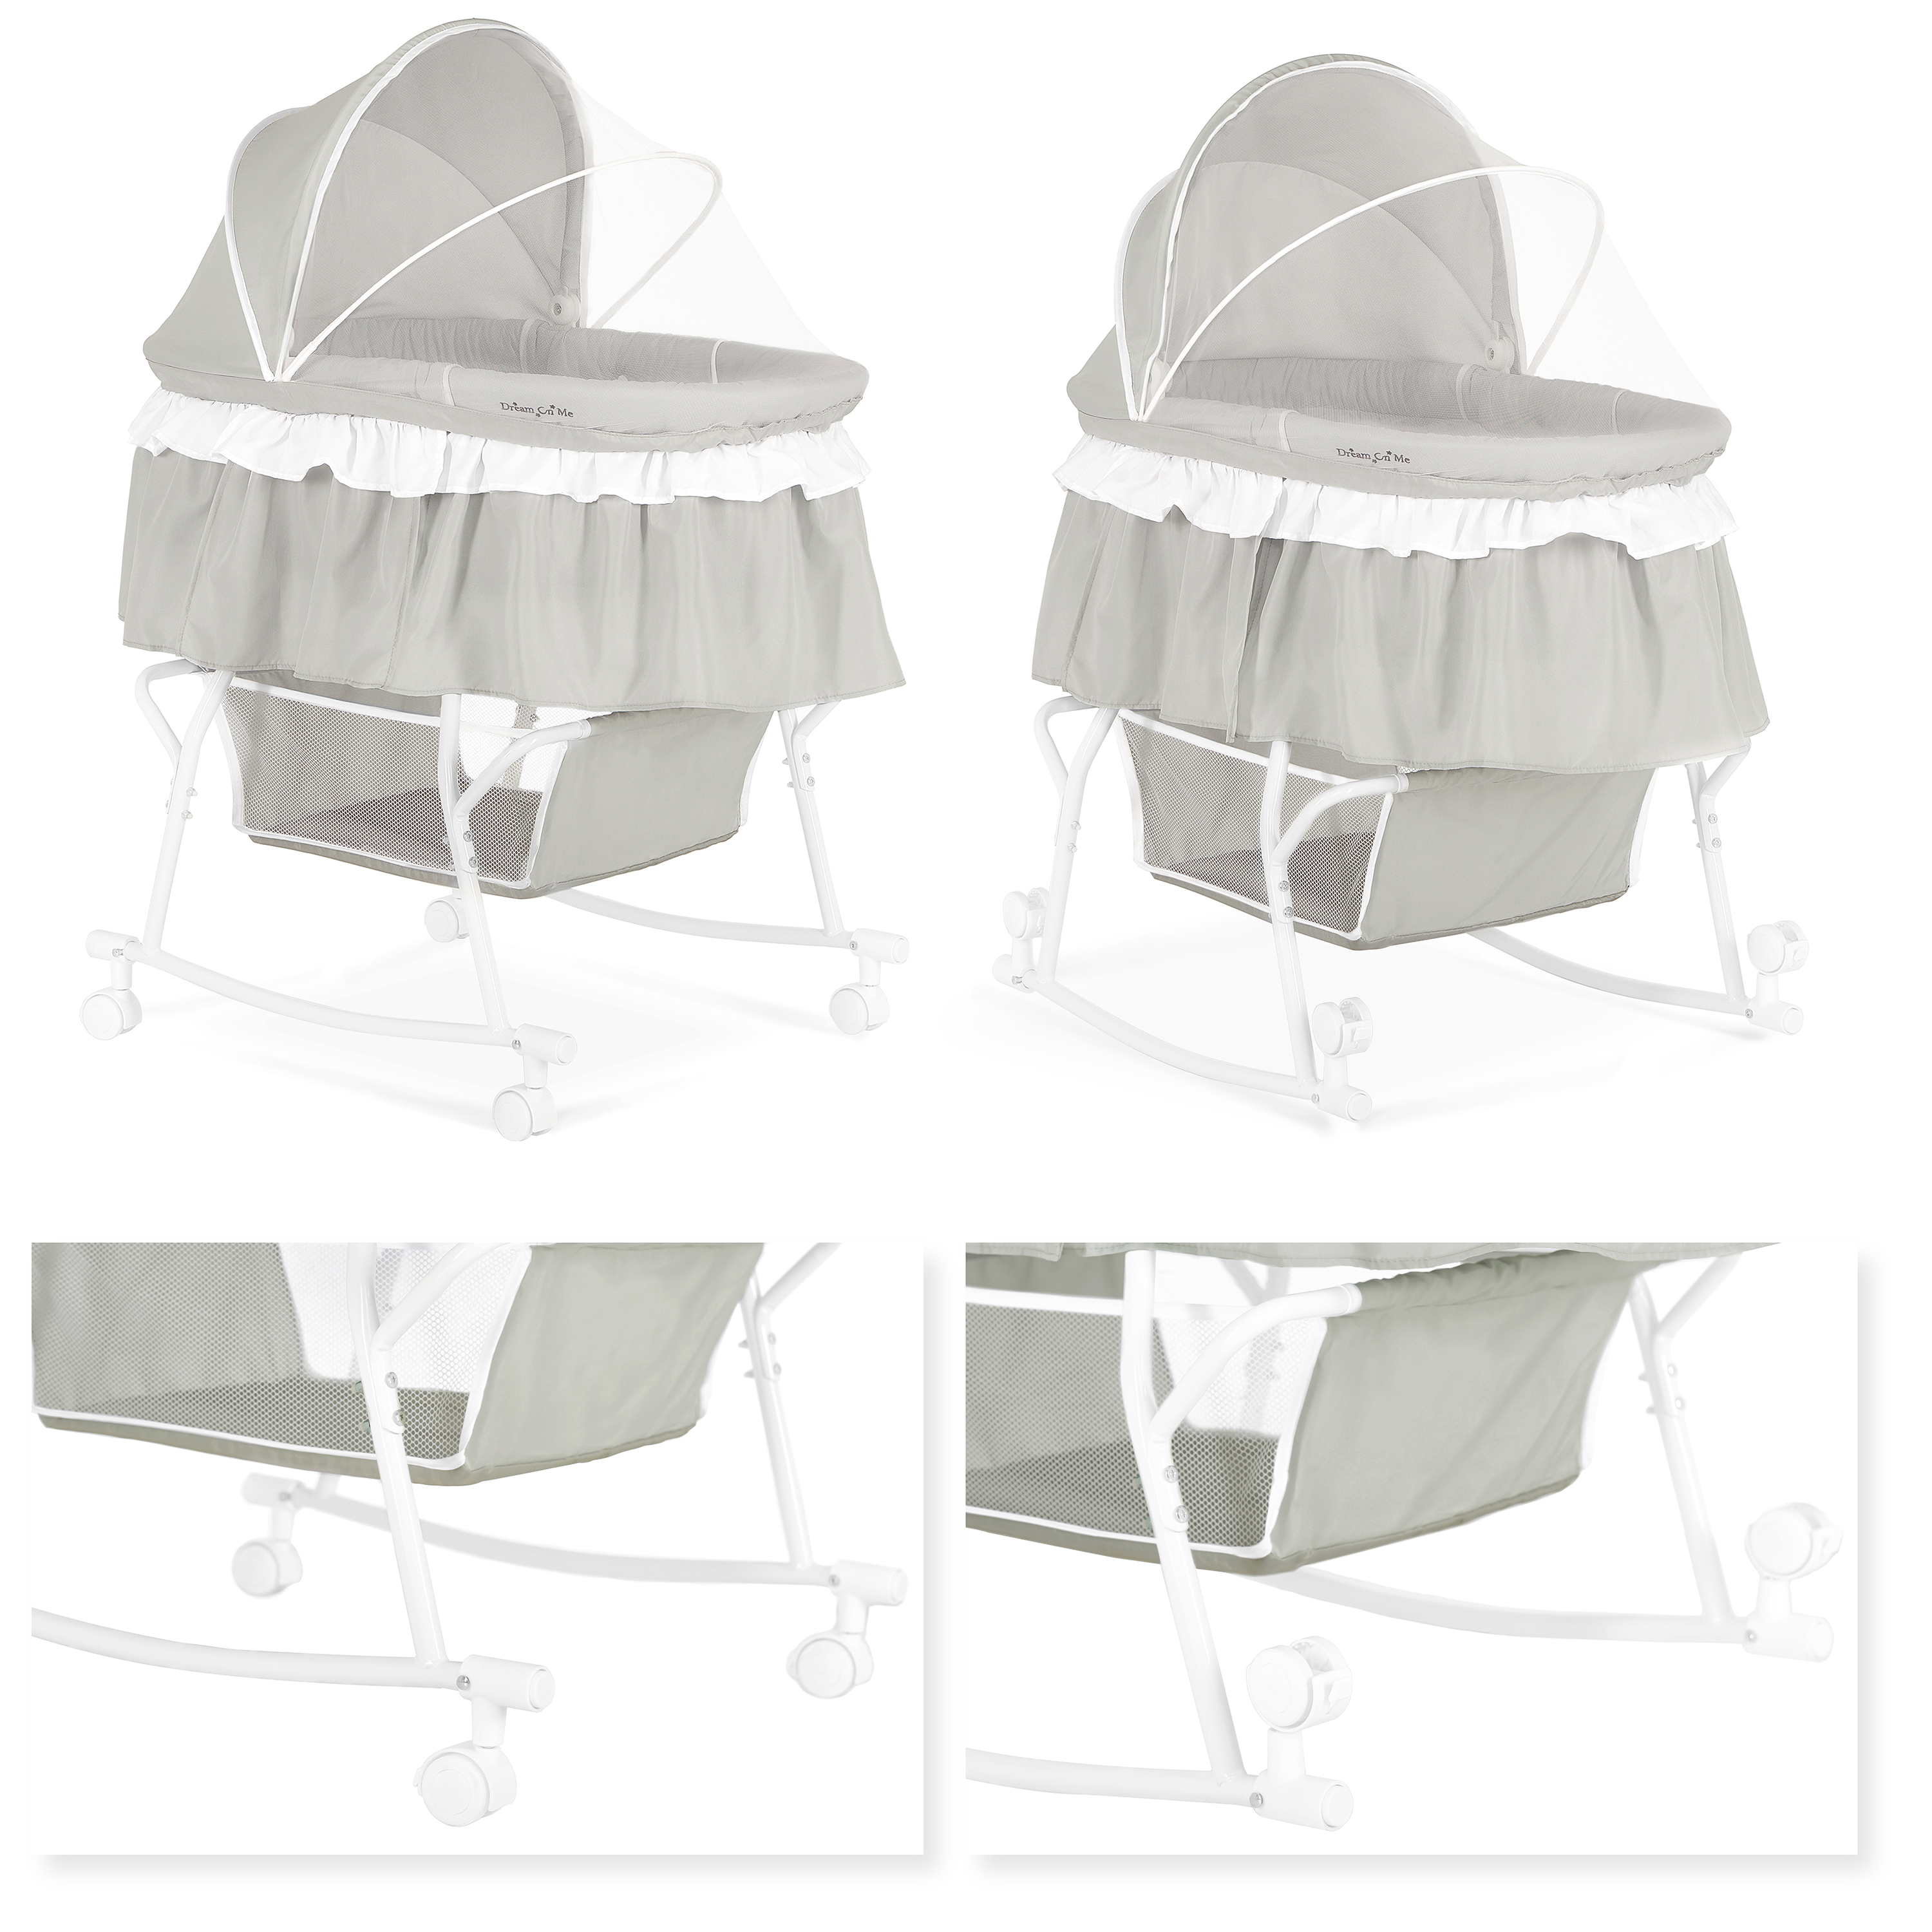 Dream On Me Lacy Portable 2-in-1 Bassinet & Cradle in Light Grey, Lightweight Baby Bassinet - image 5 of 26